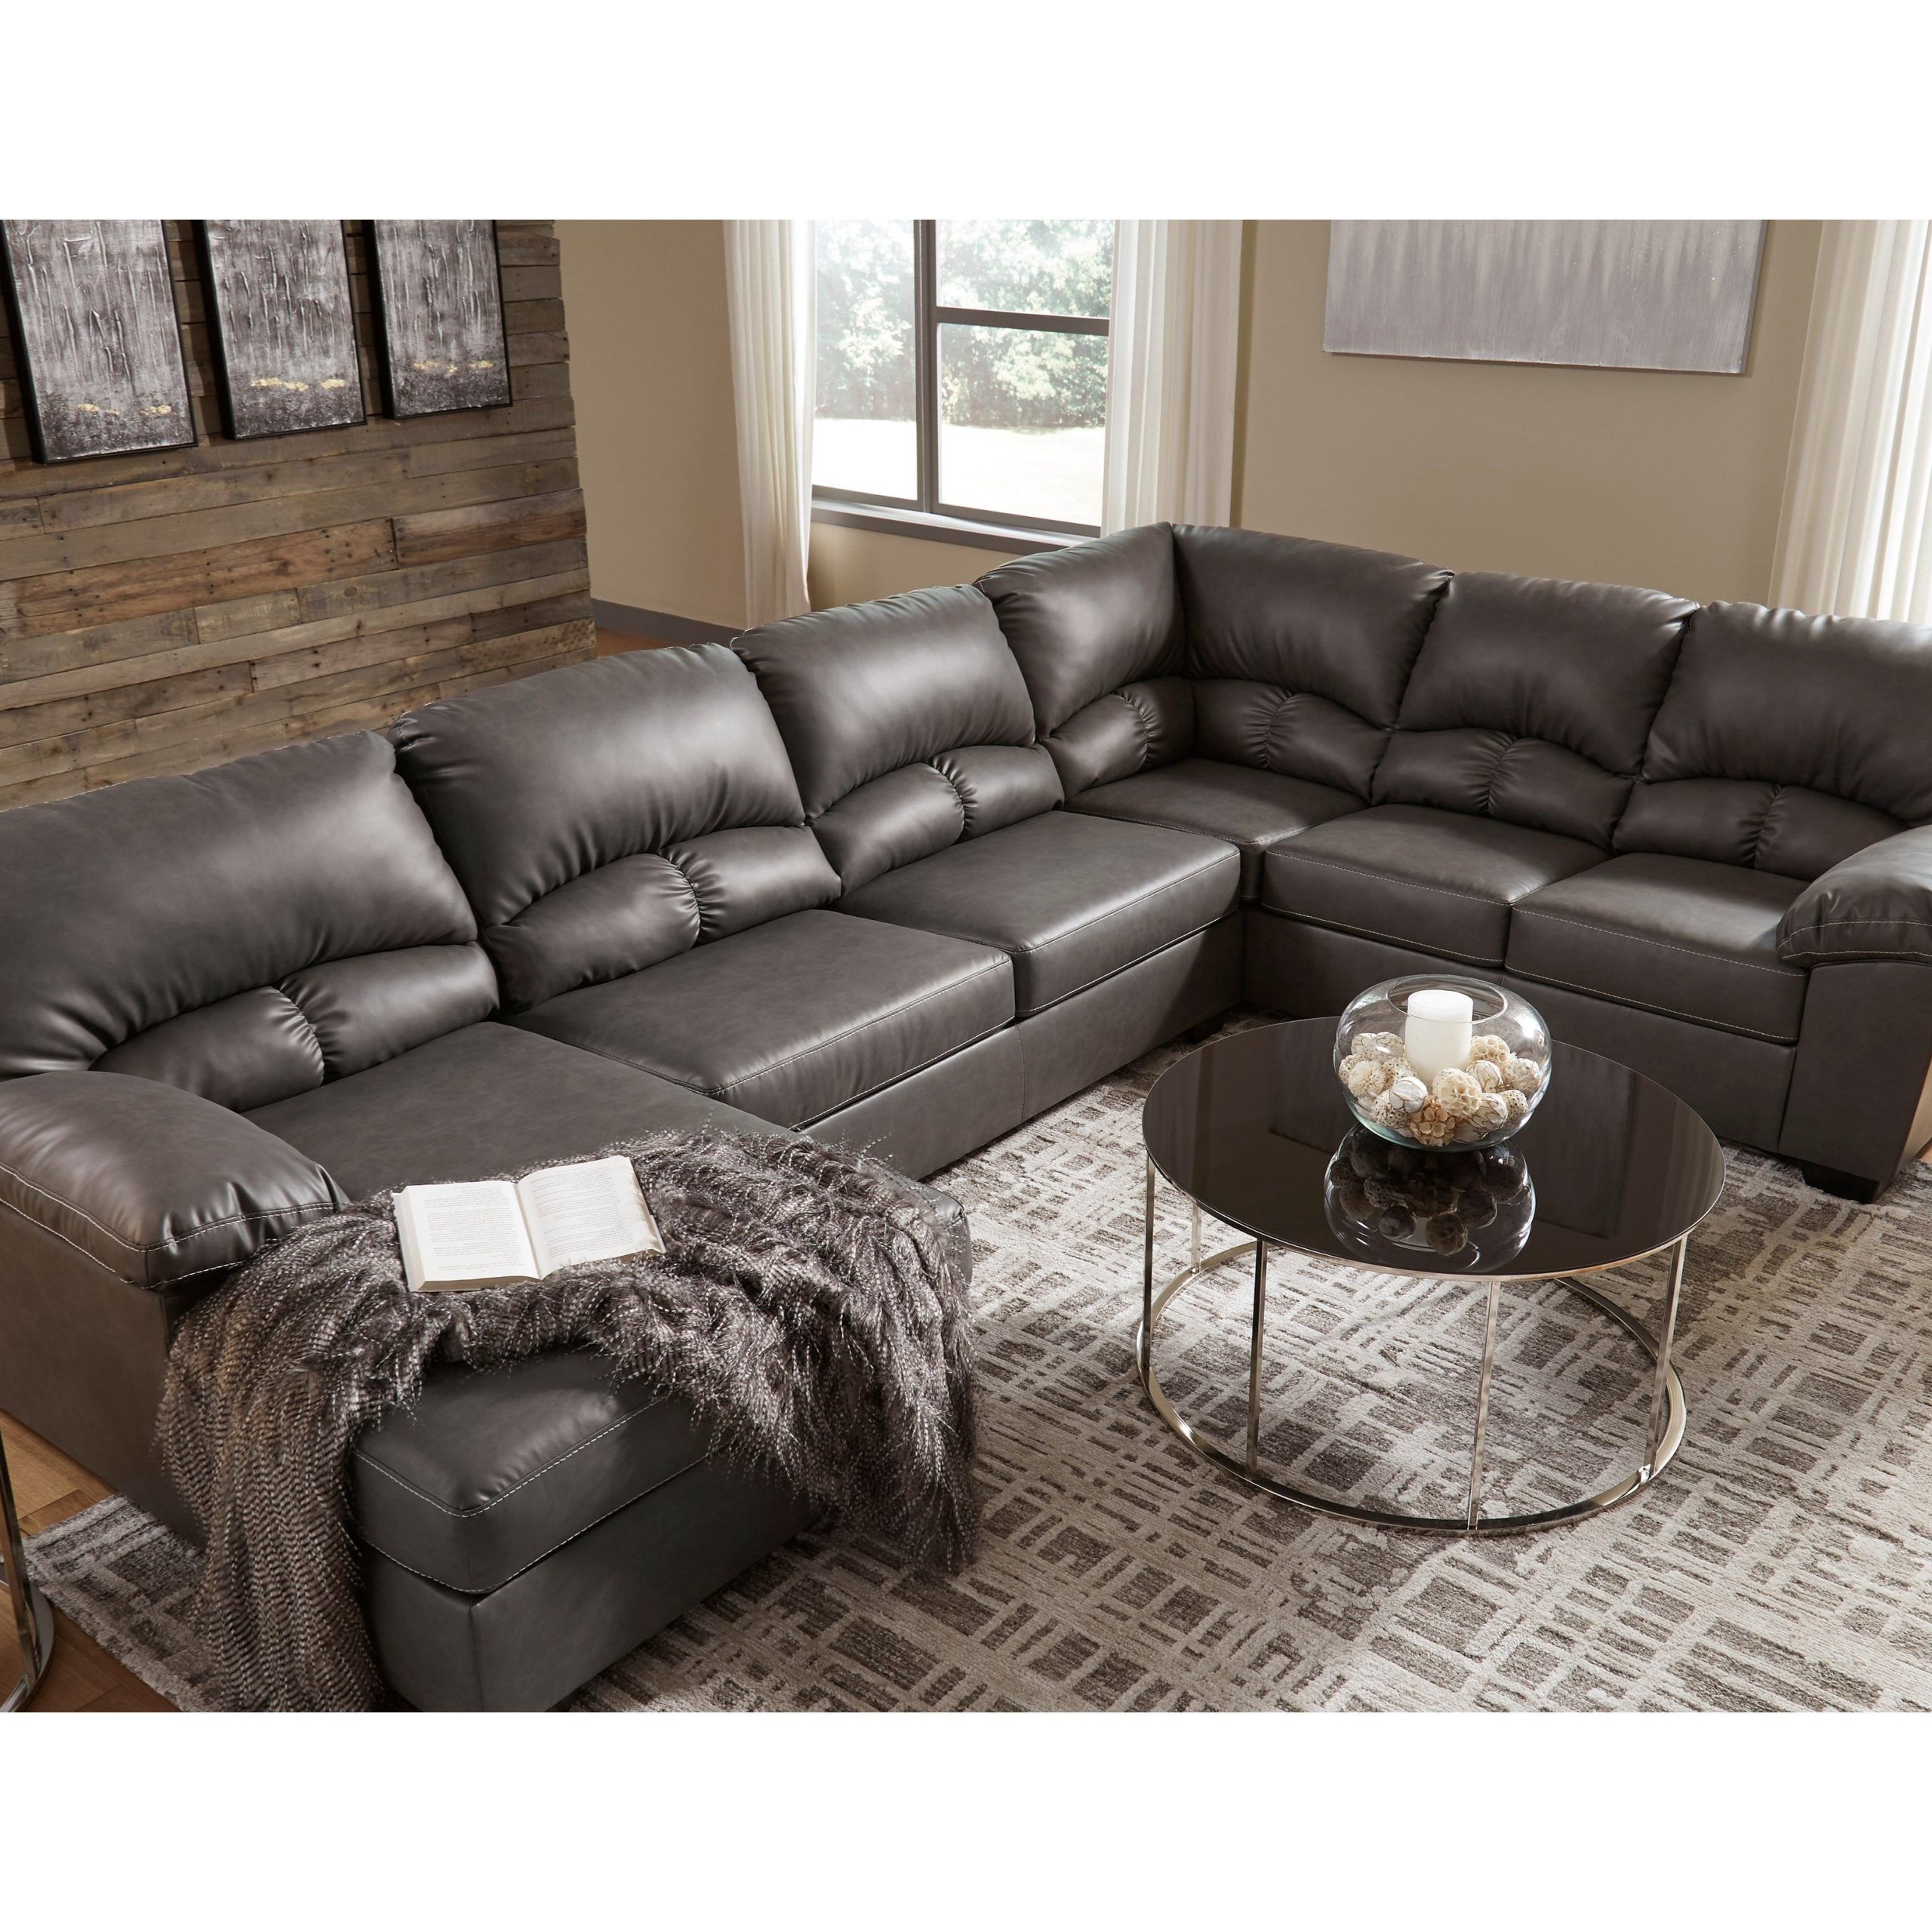 Benchcraftashley Aberton Faux Leather 3 Piece Sectional With Chaise Intended For Most Popular 3 Piece Leather Sectional Sofa Sets (Photo 2 of 15)